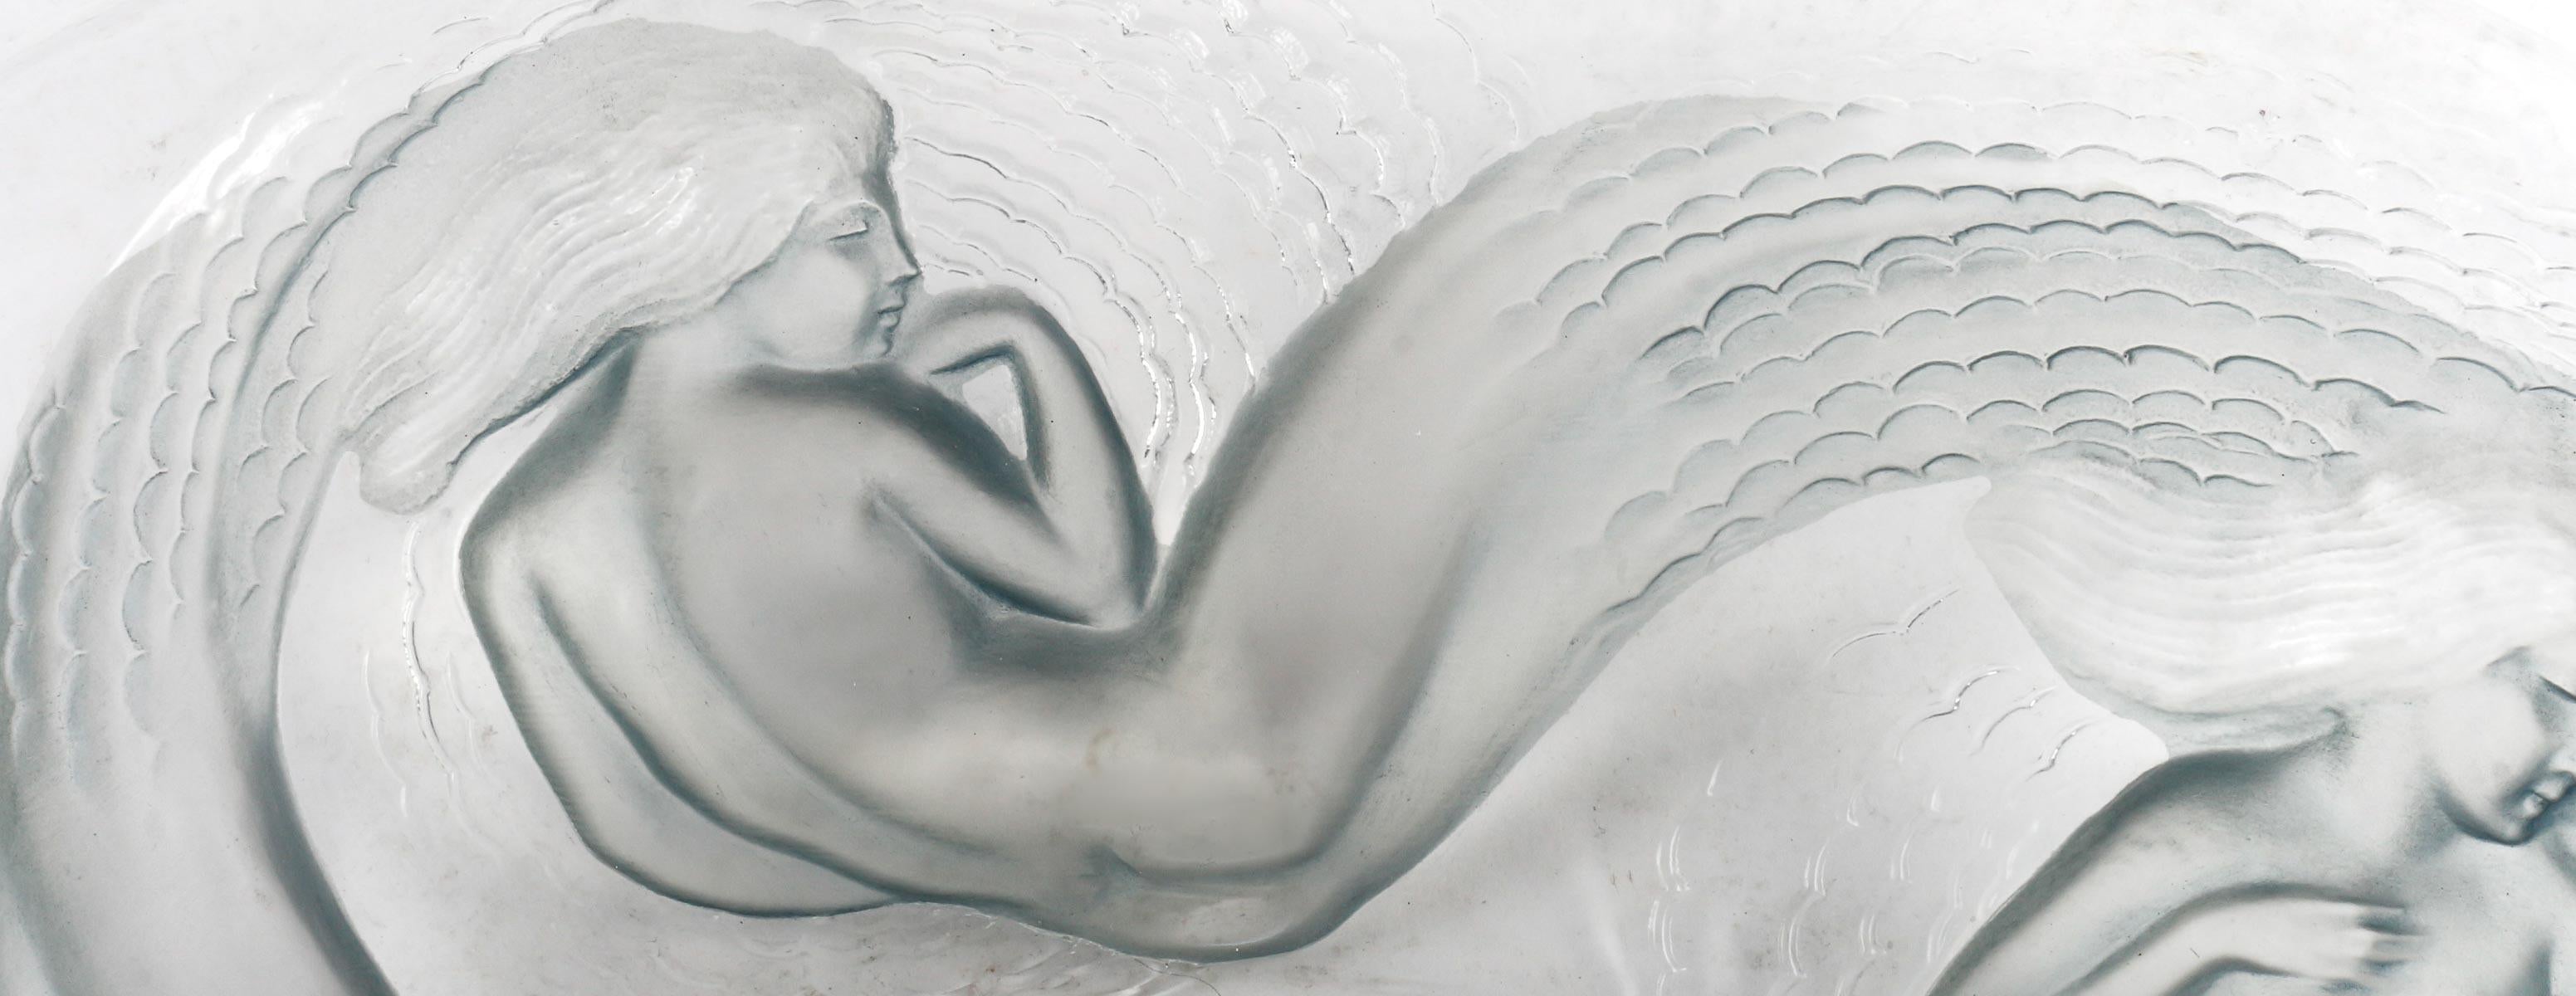 1932 René Lalique Bowl Calypso Glass with Blue Grey Patina, Mermaids In Good Condition For Sale In Boulogne Billancourt, FR